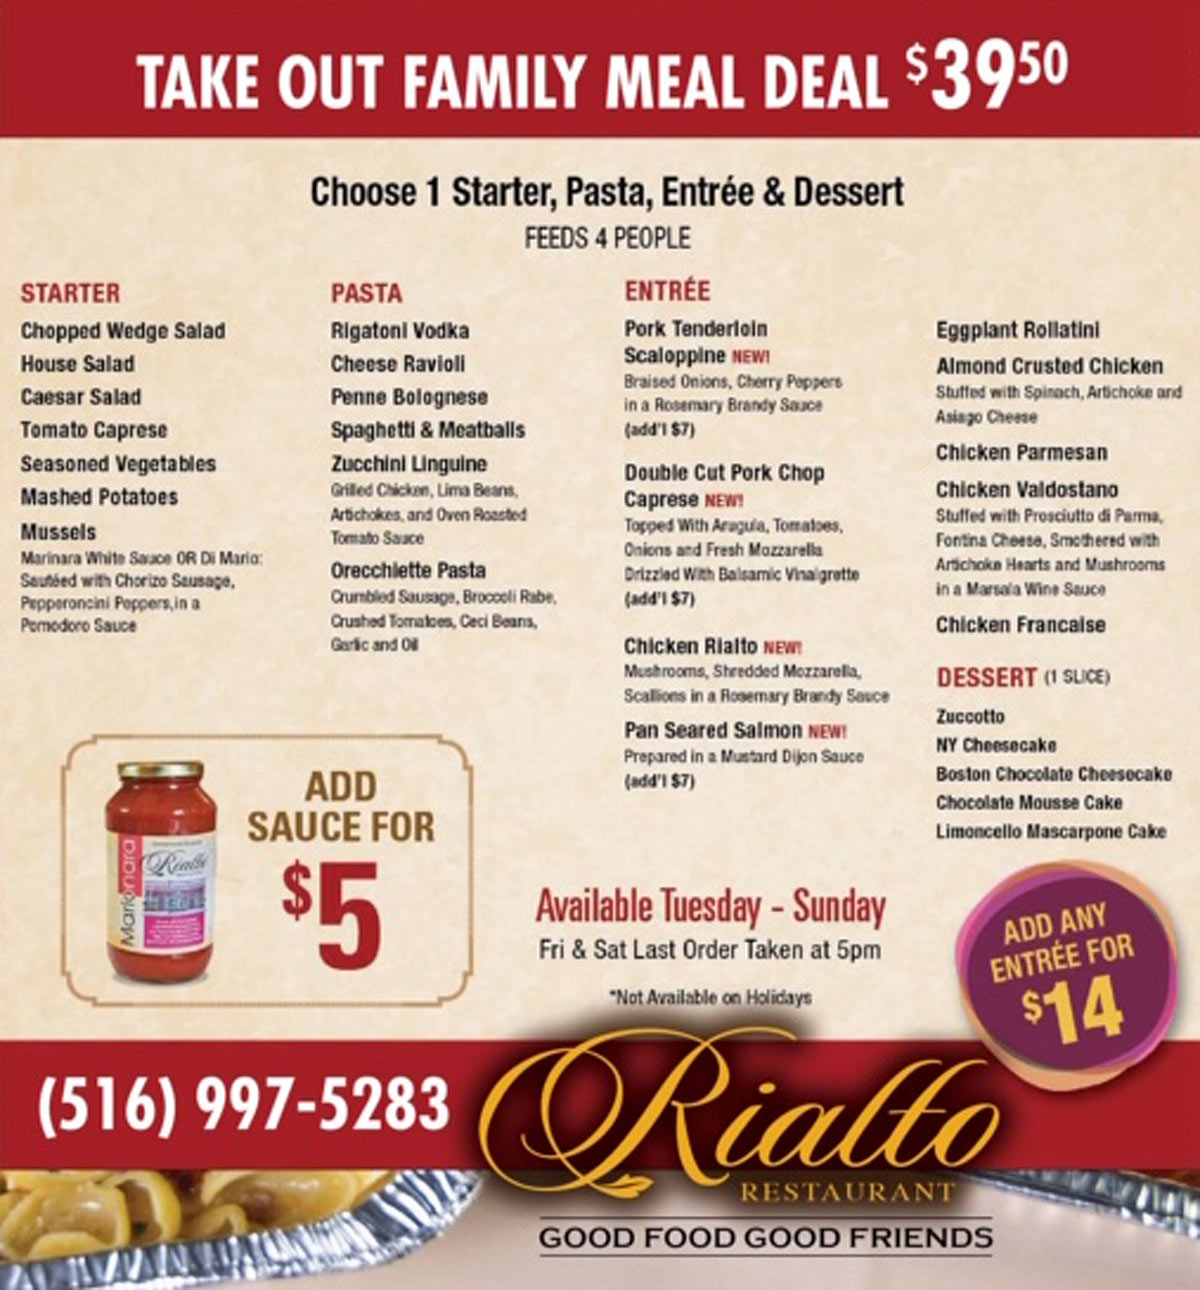 which restaurants have family meal deals